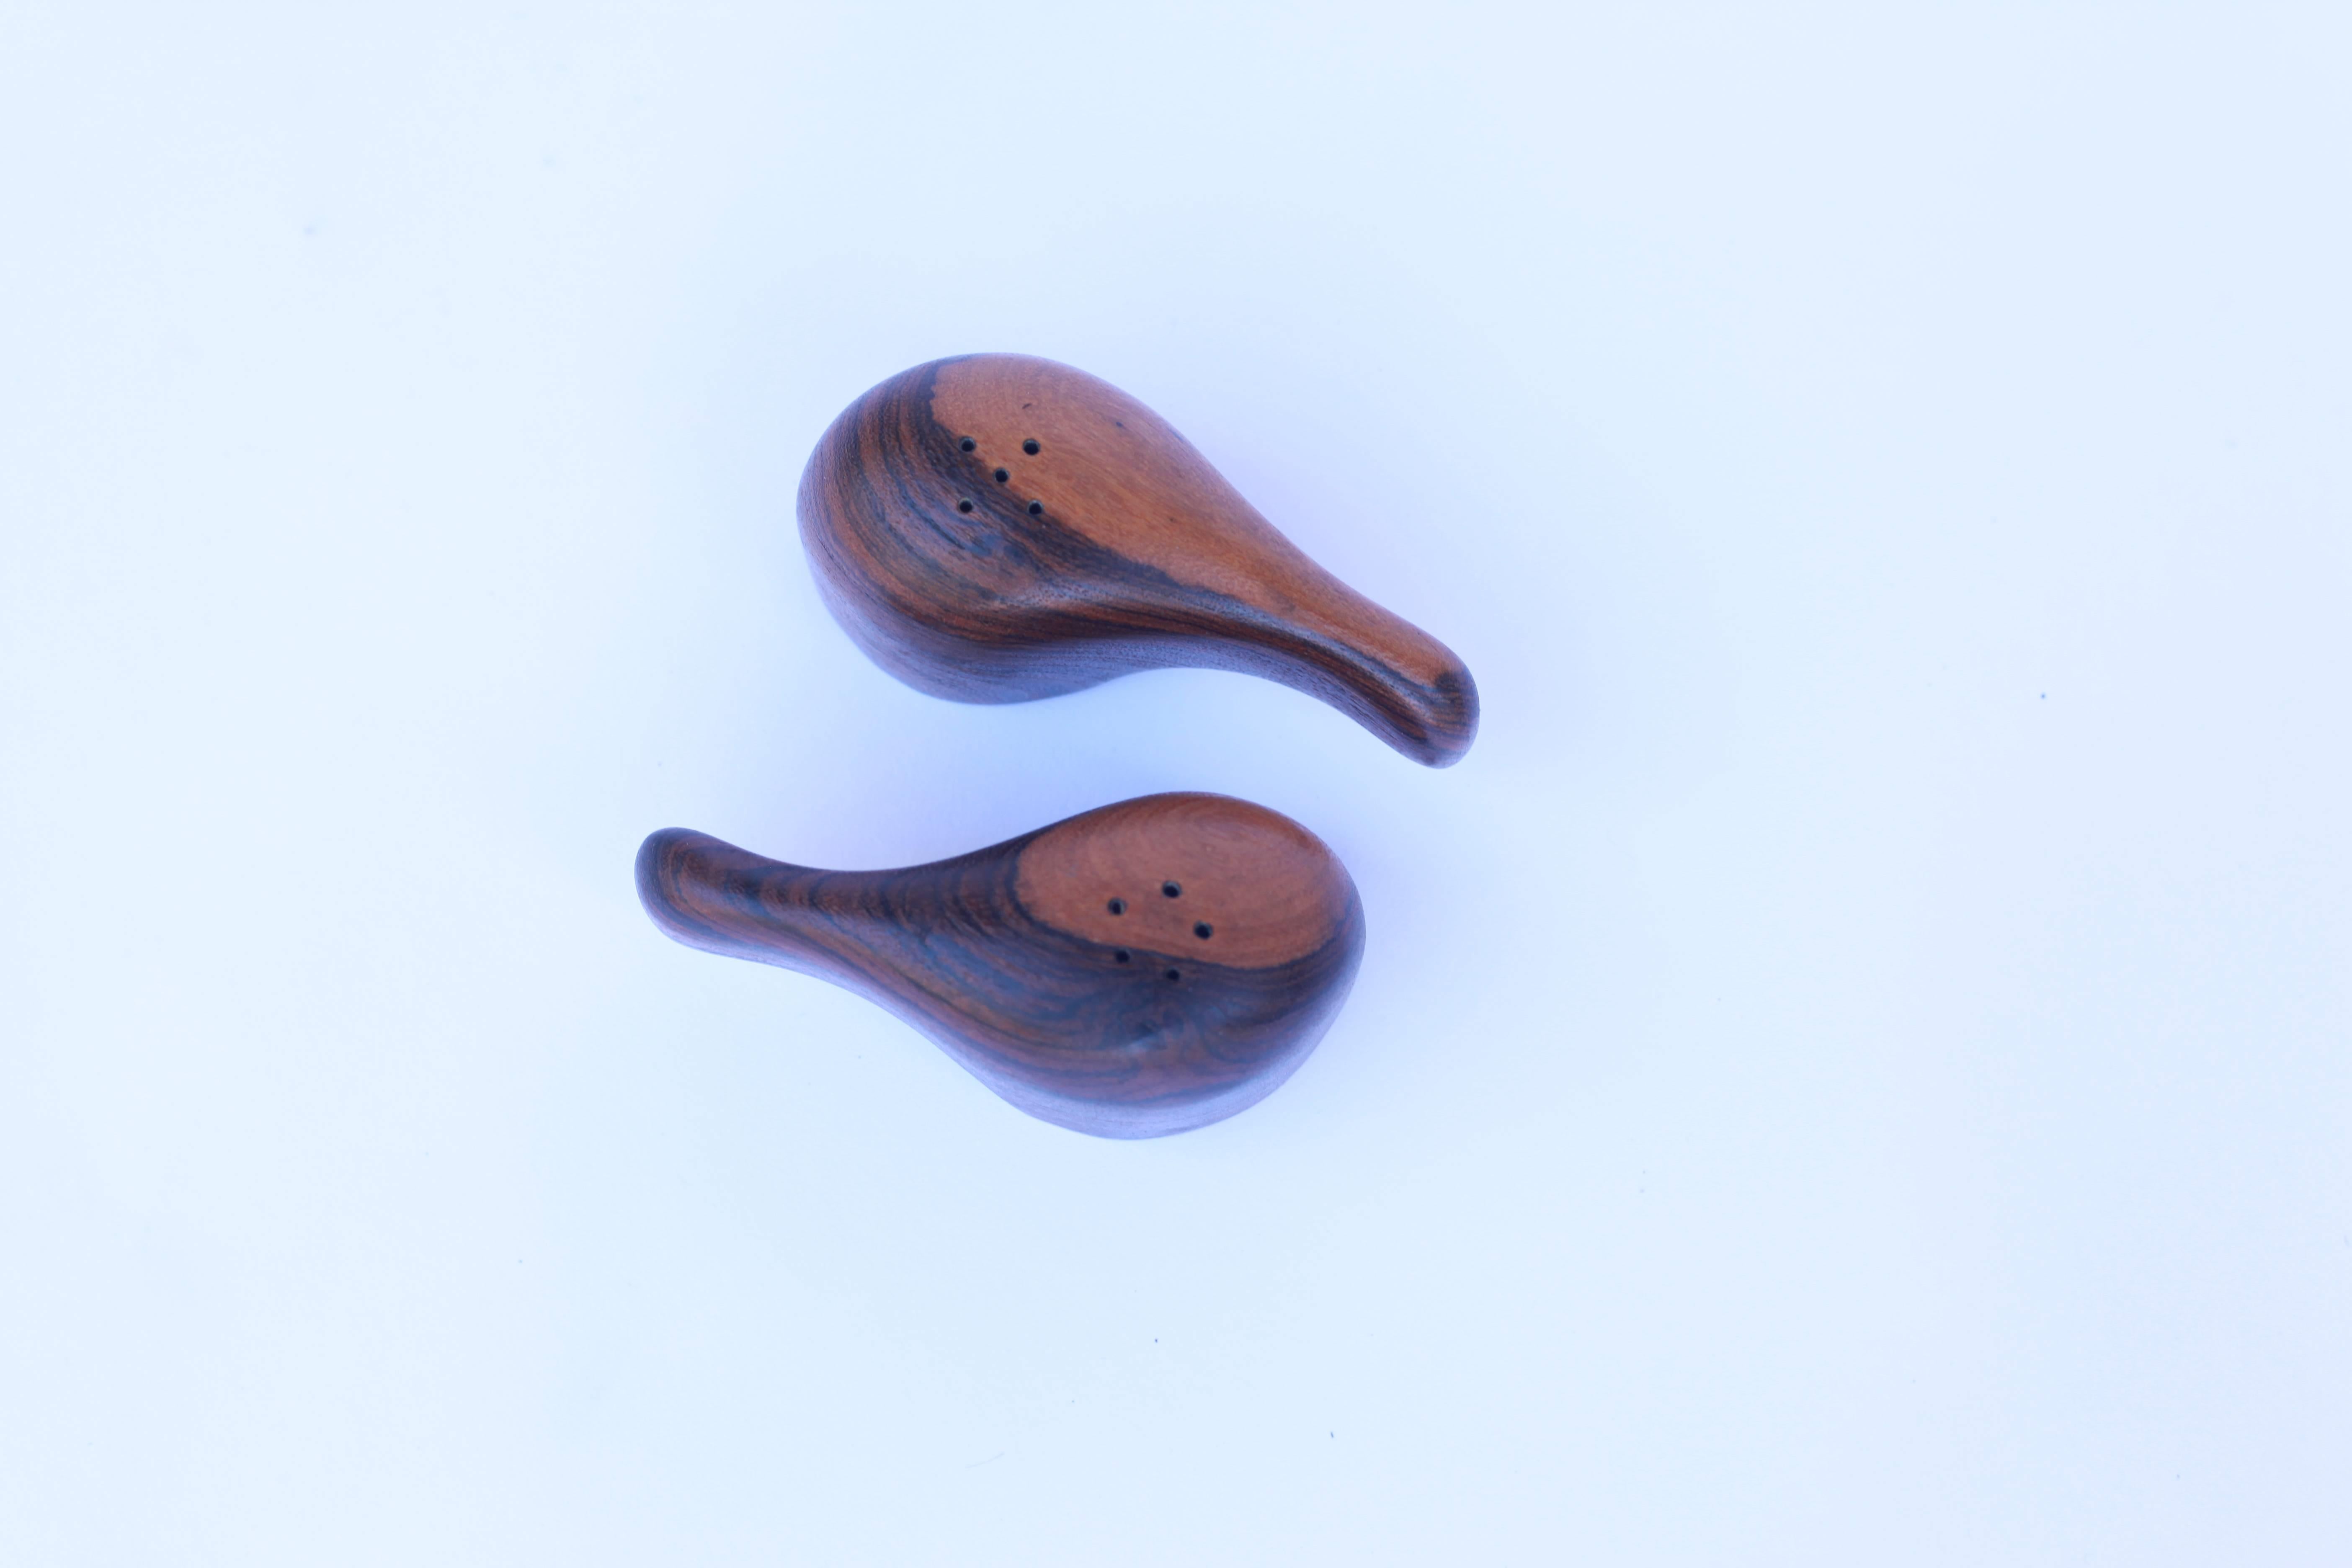 A wonderful set of salt and pepper shakers in a gorgeous exotic wood which appears to be either rosewood or cocobolo.